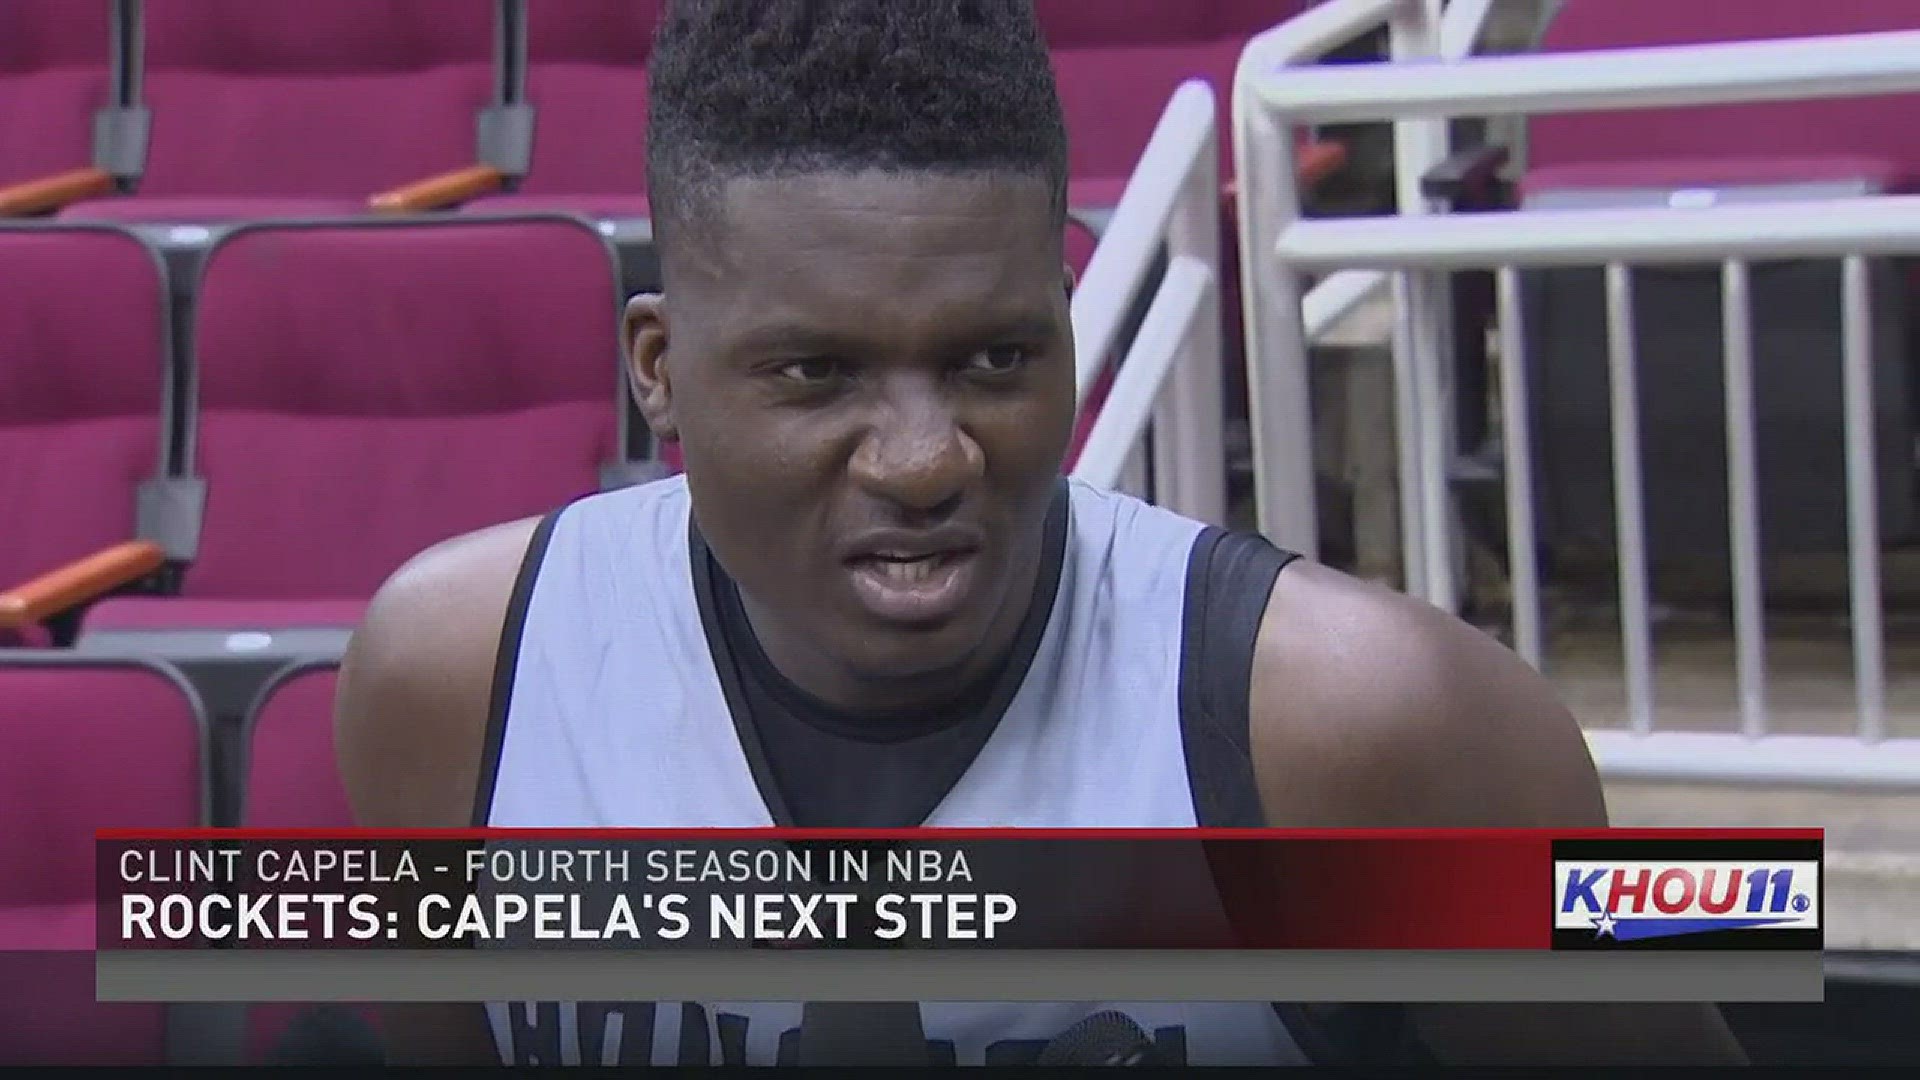 Clint Capela continues to improve on the court.